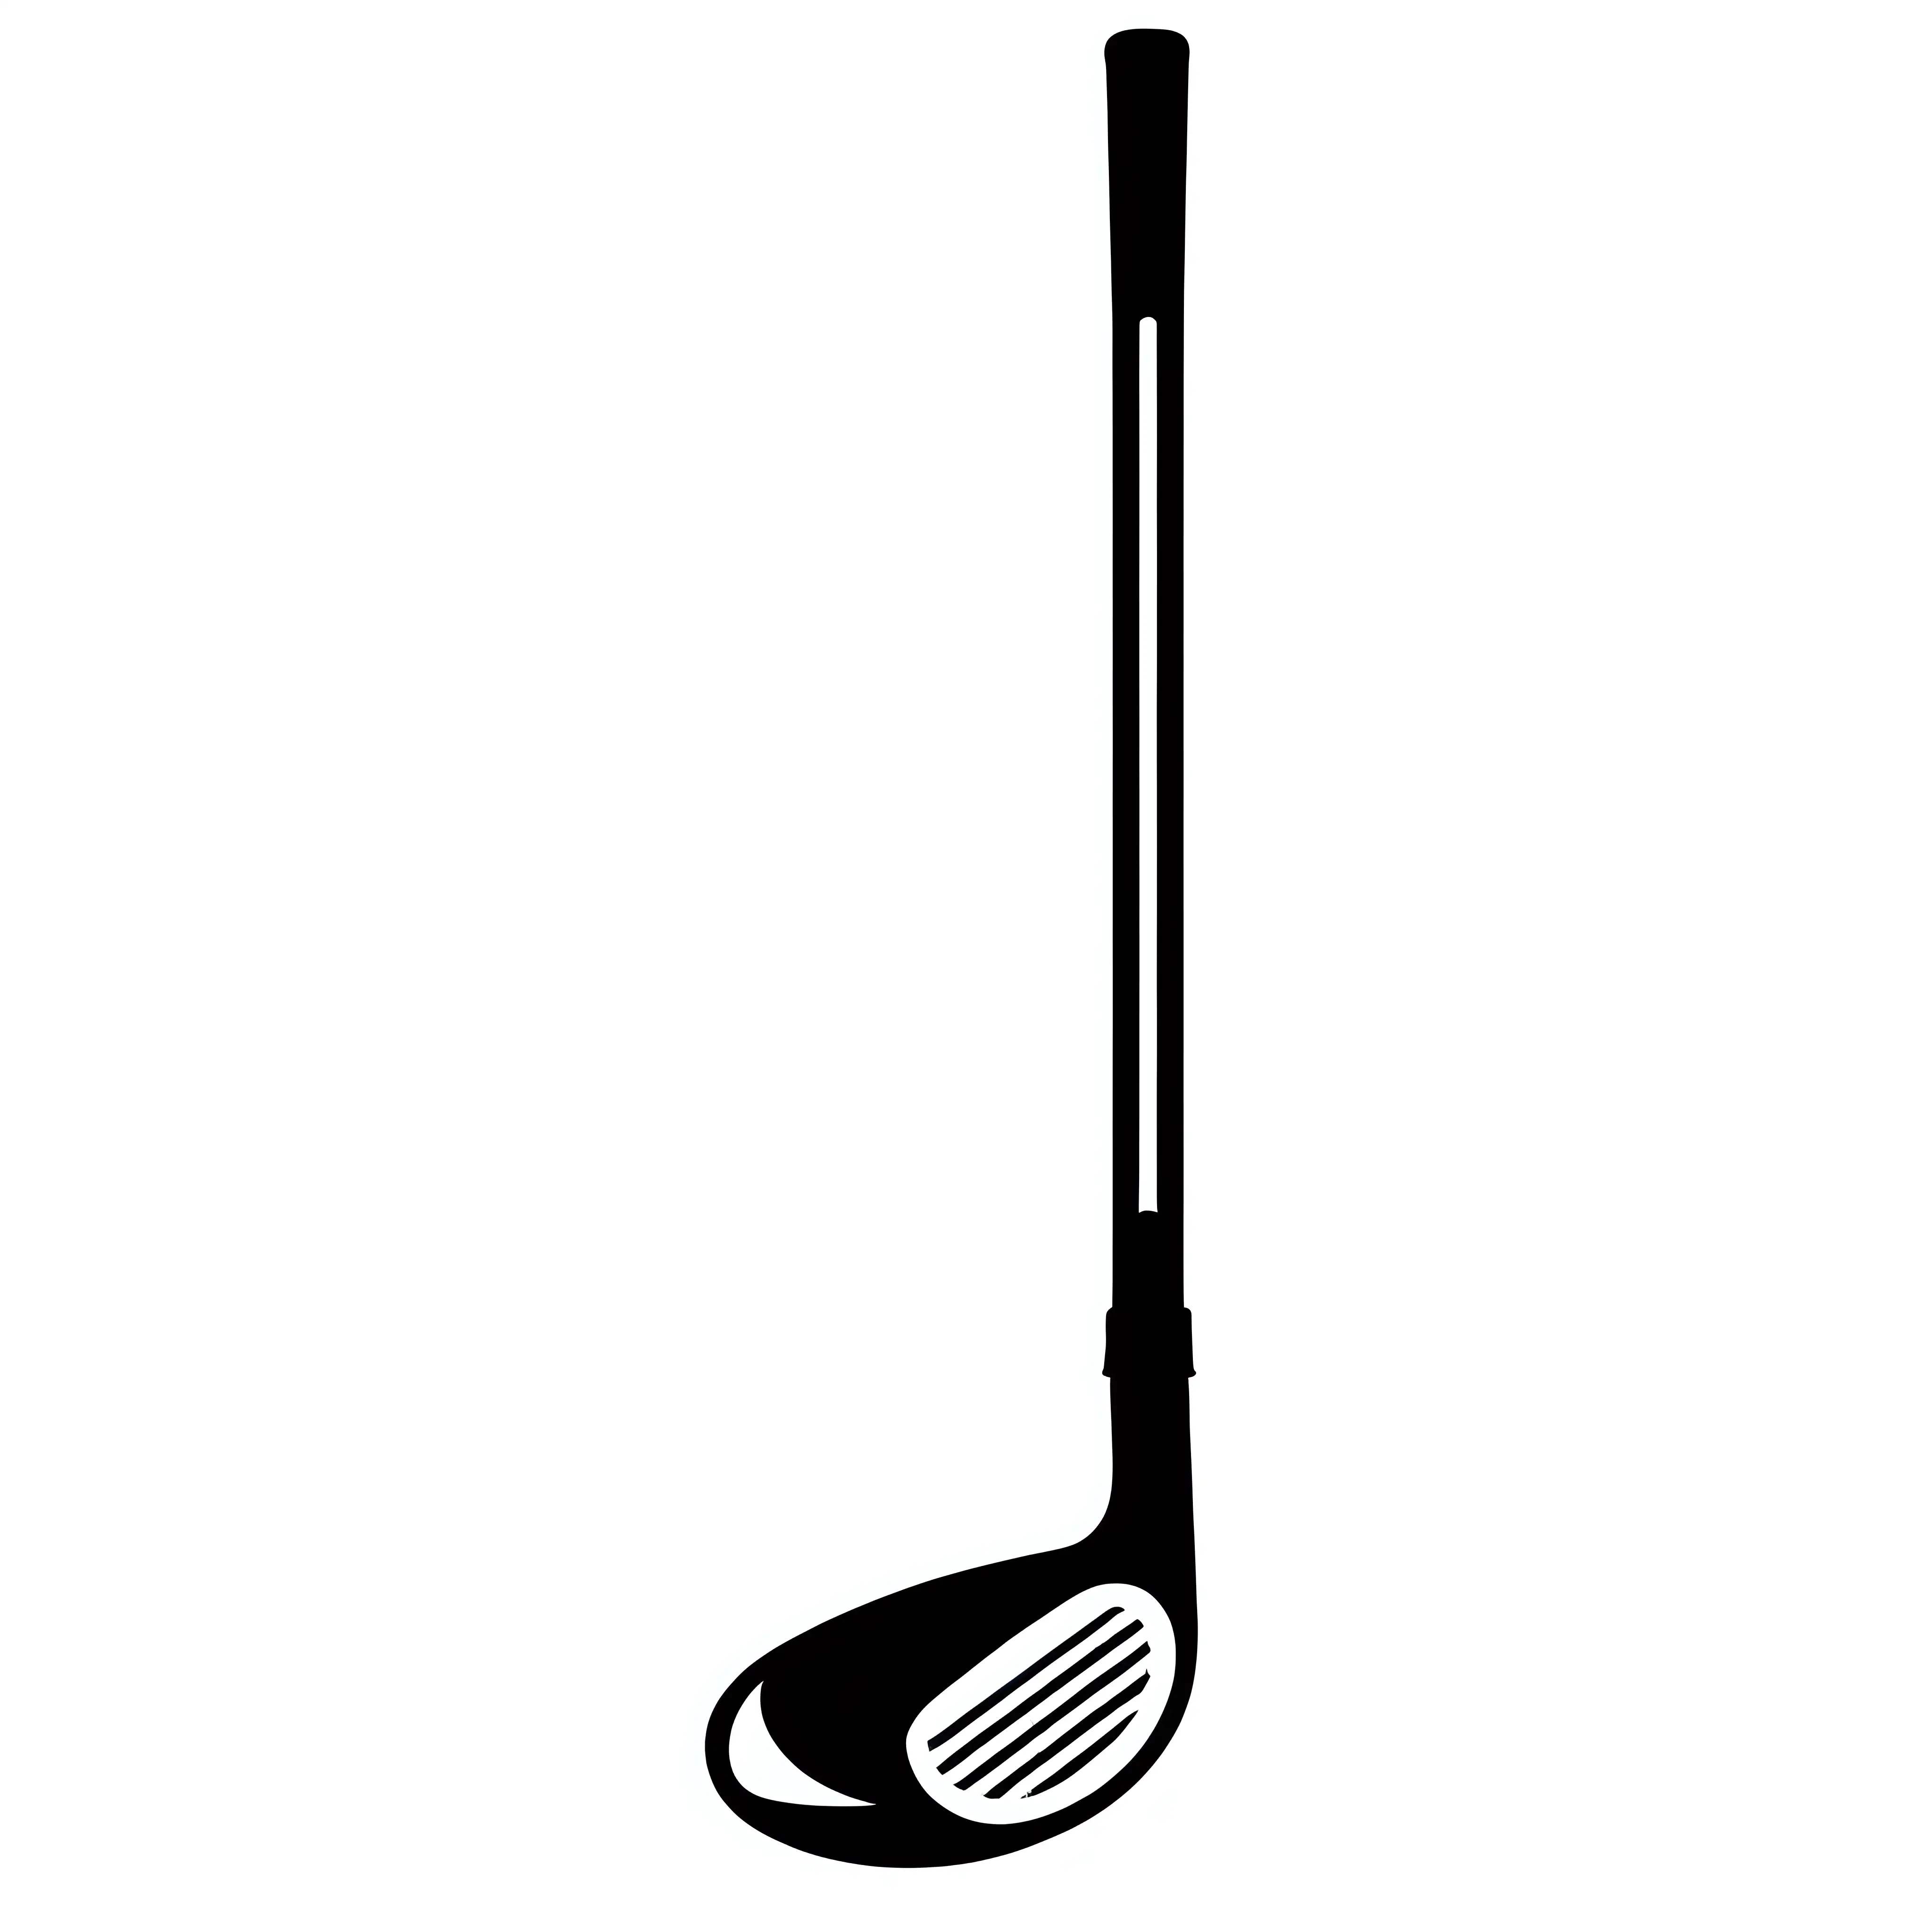 Black silhouette of golf club driver icon on white background, simple flat design vector illustration with no shadow or other elements, no text and letters in the picture, solid black color fill, simple shapes, bold outline, graphic style, minimalist design